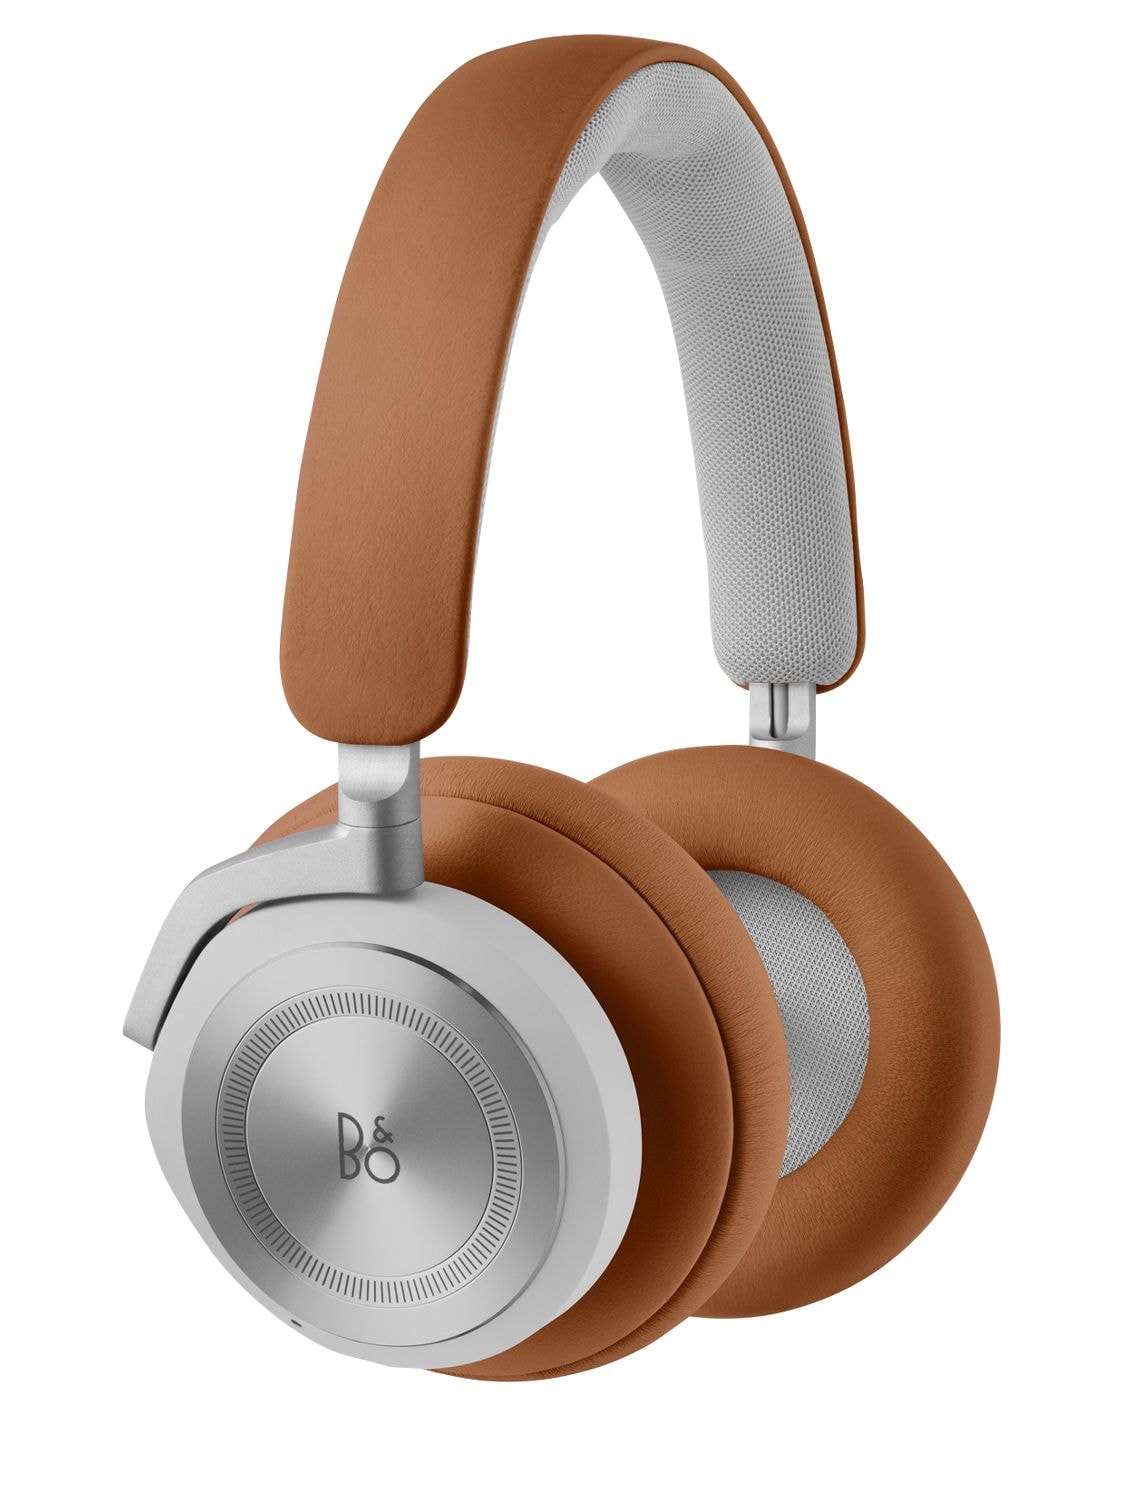 Image of Beoplay Hx Timber Headphones